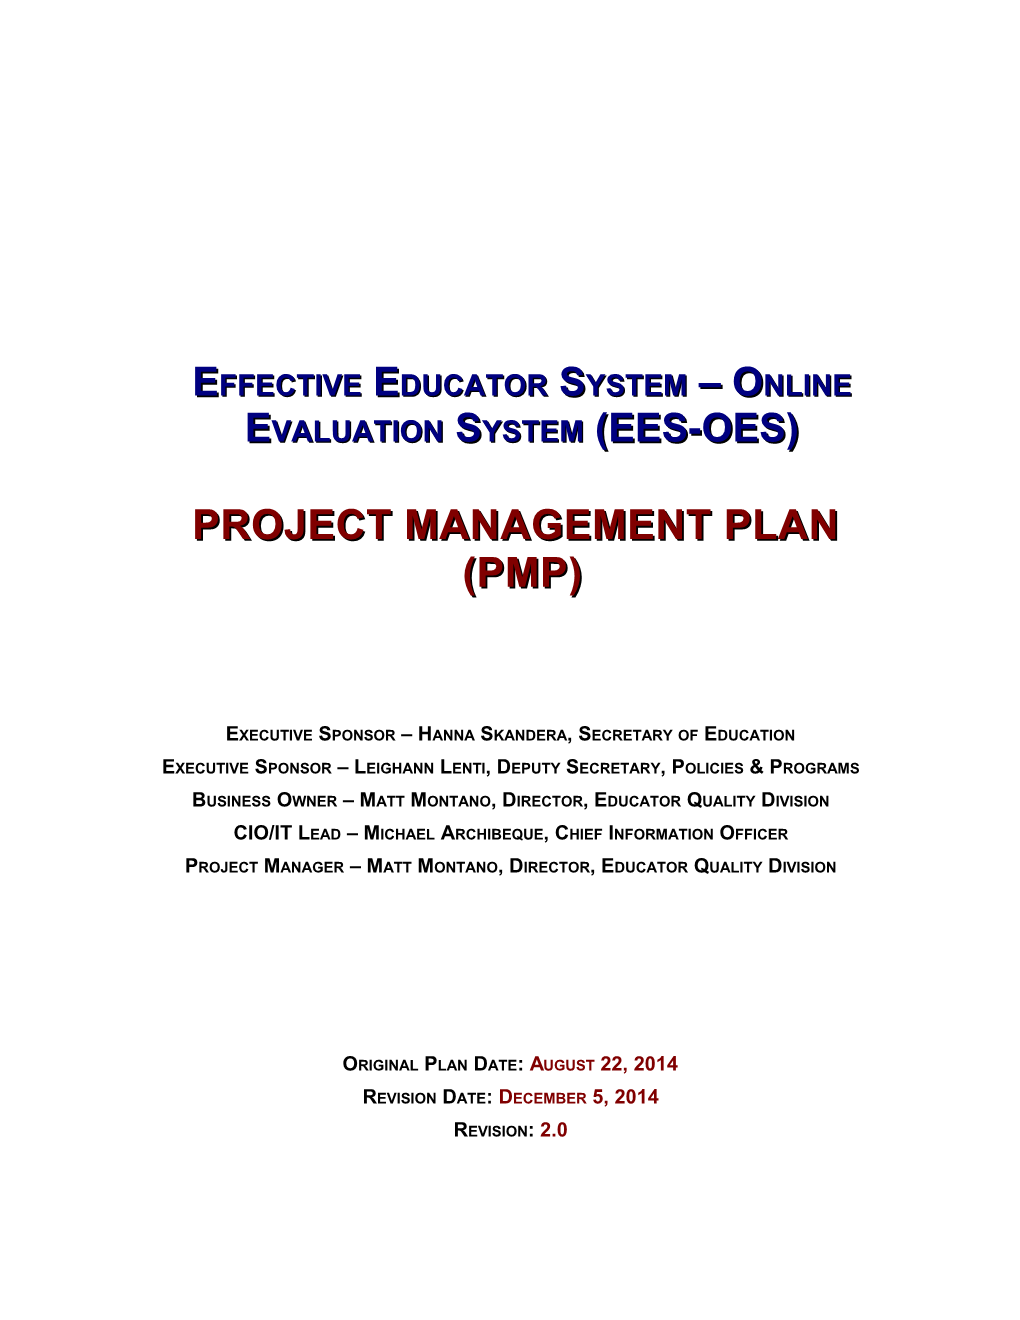 Effective Educator System Online Evaluation System (EES-OES)